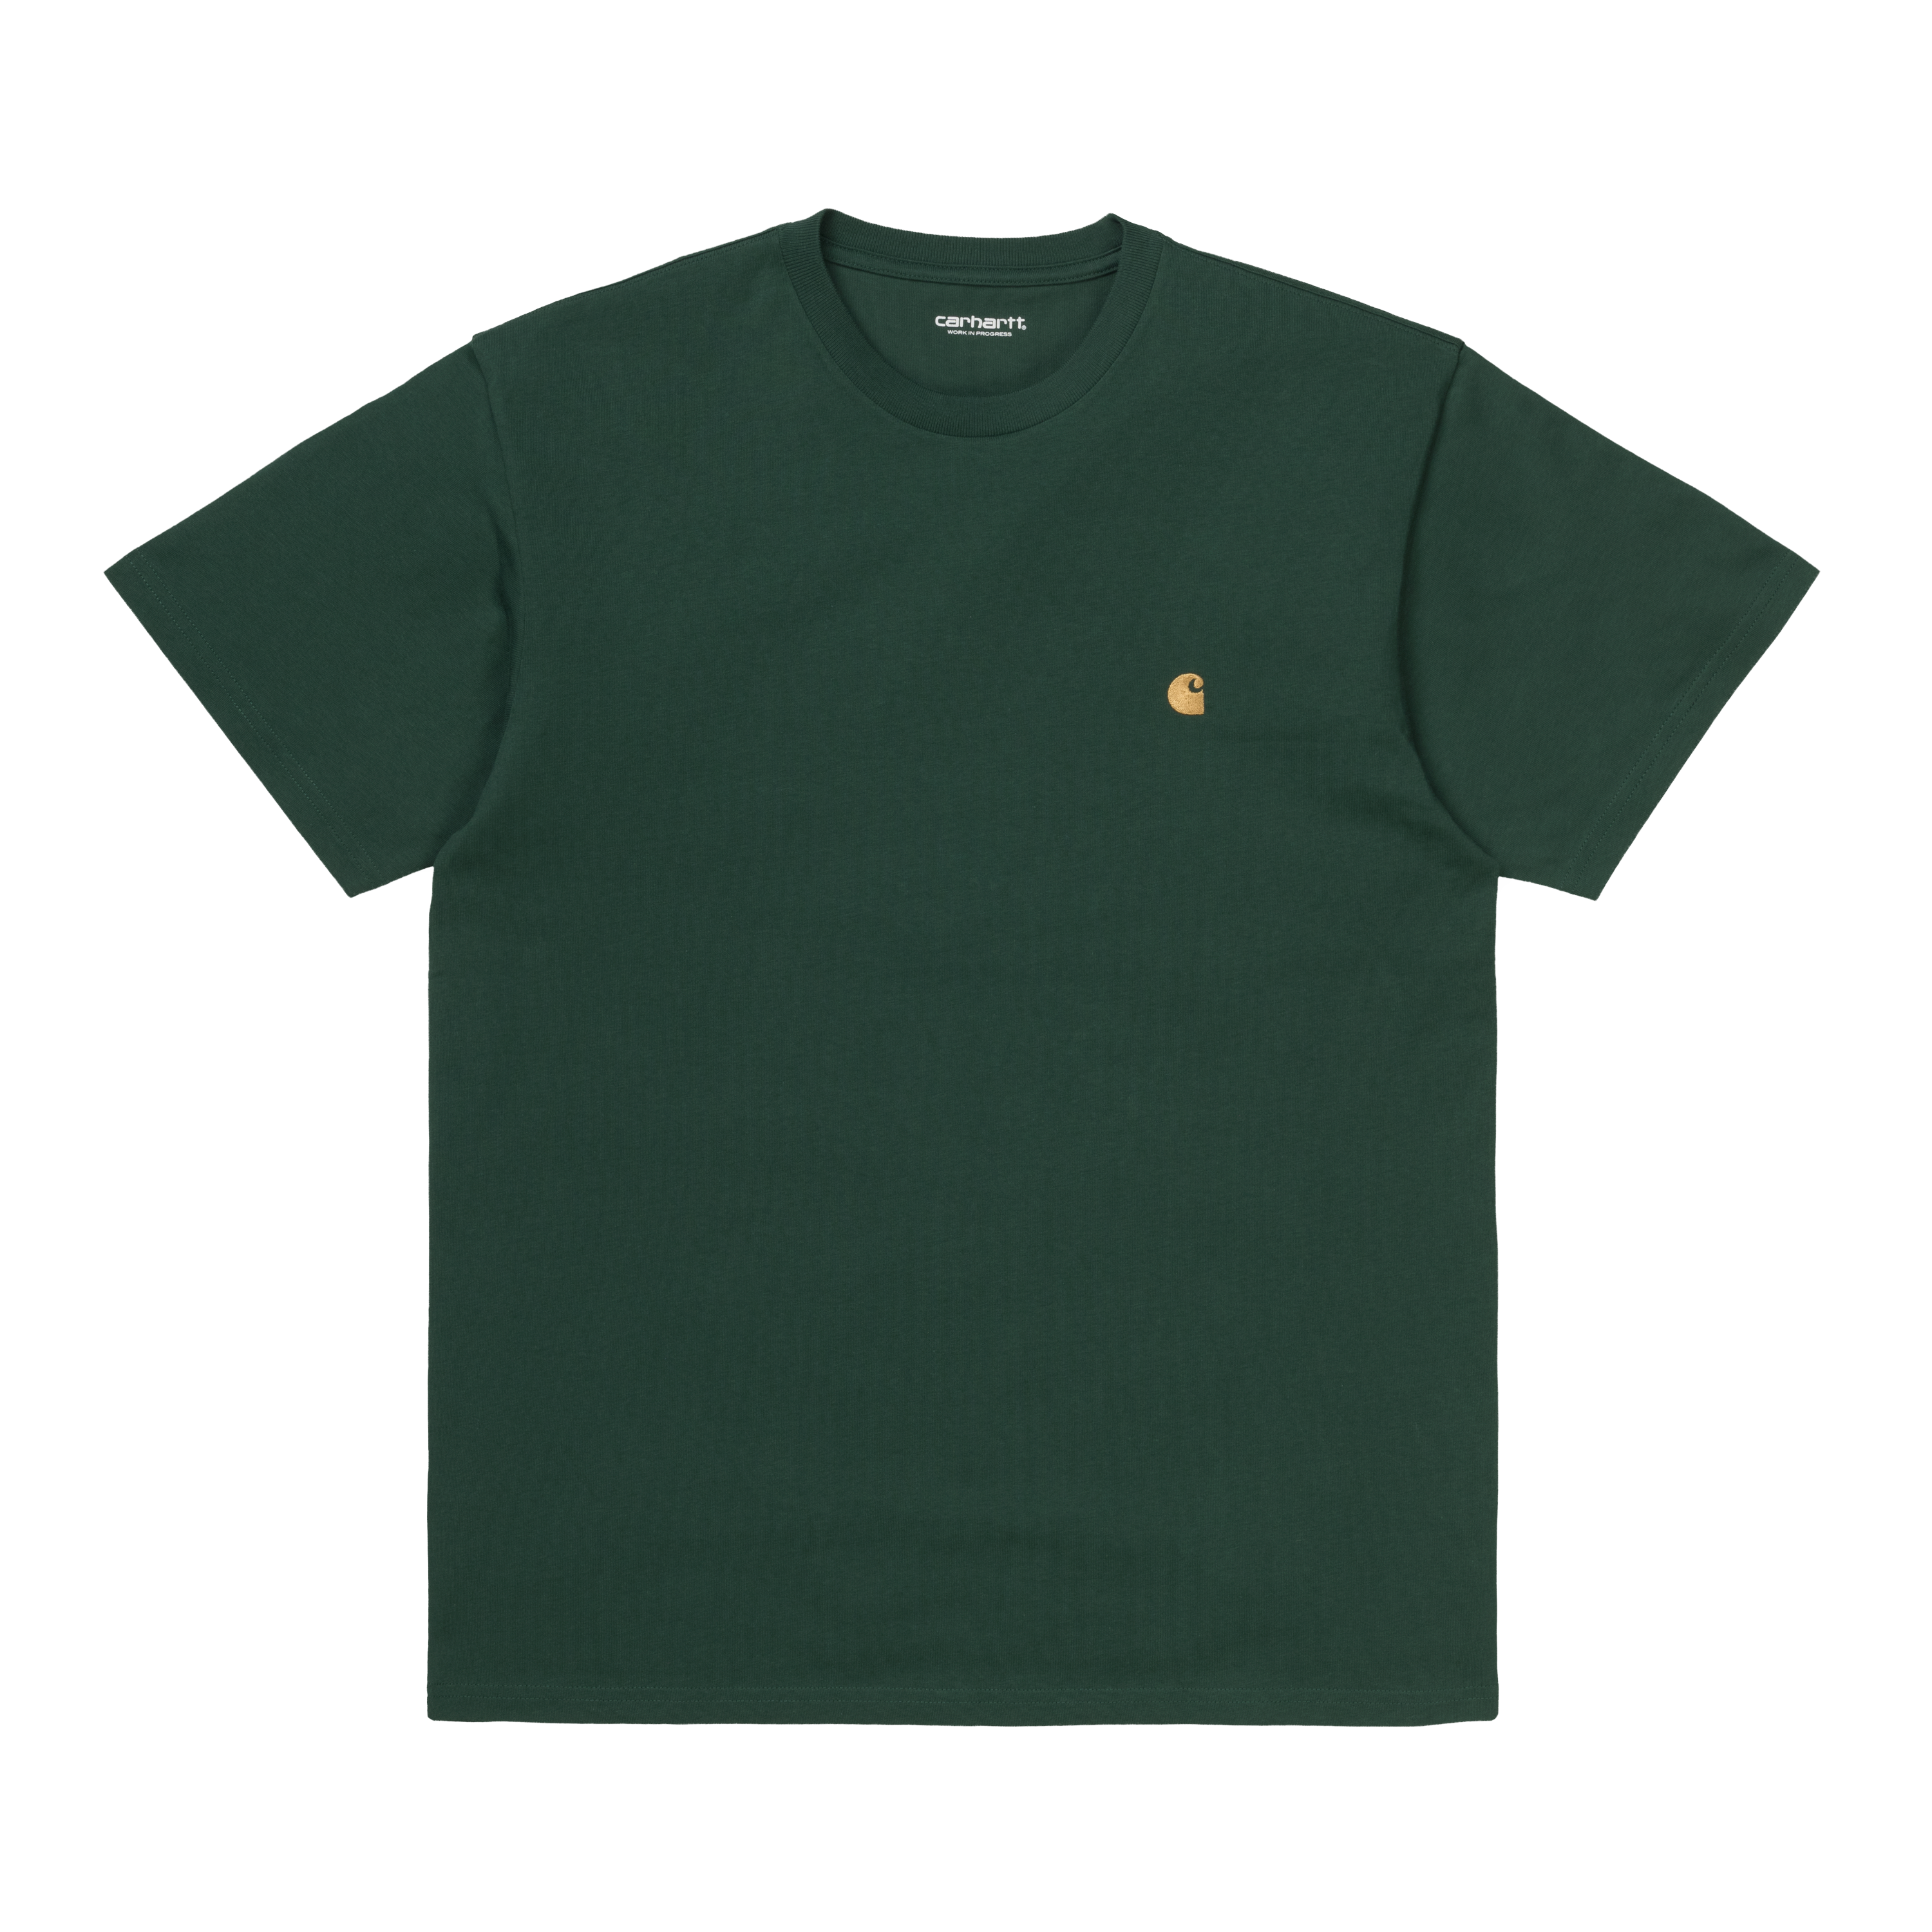 Carhartt WIP T-Shirts and Polos Loose Fit | carhartt-wip.com